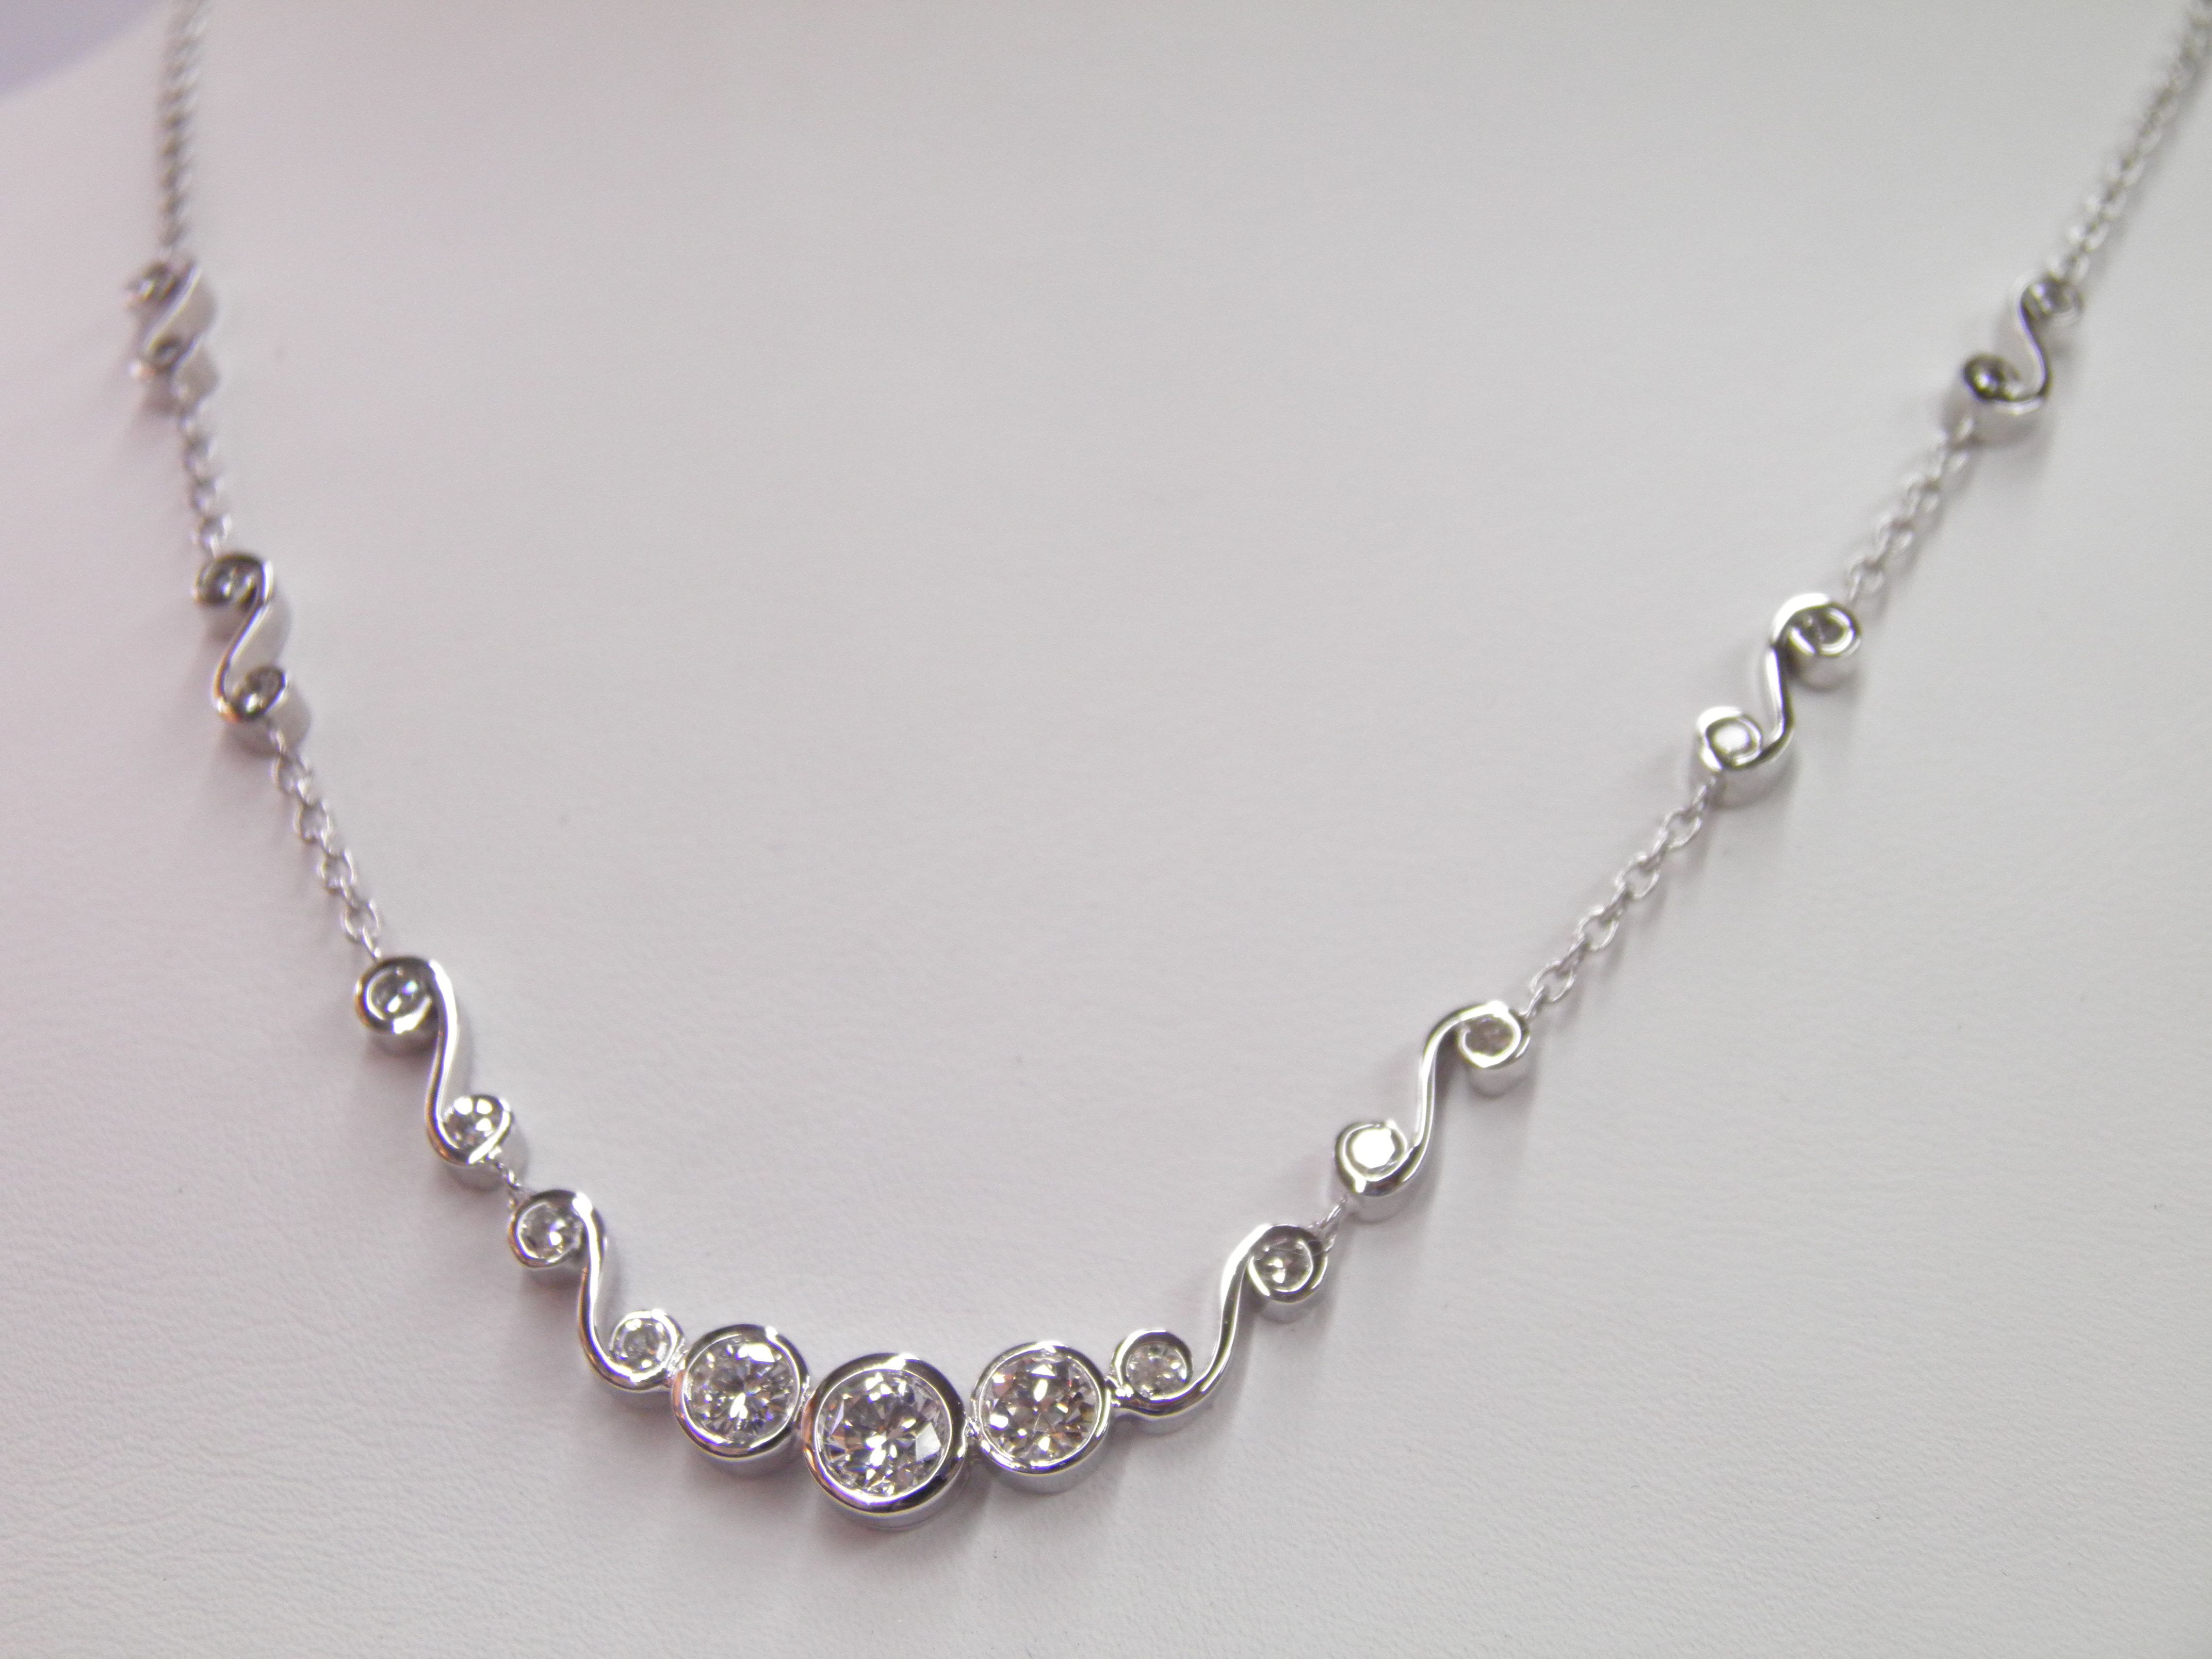 Buy cheap Diamond Necklace And Earring Set: Price